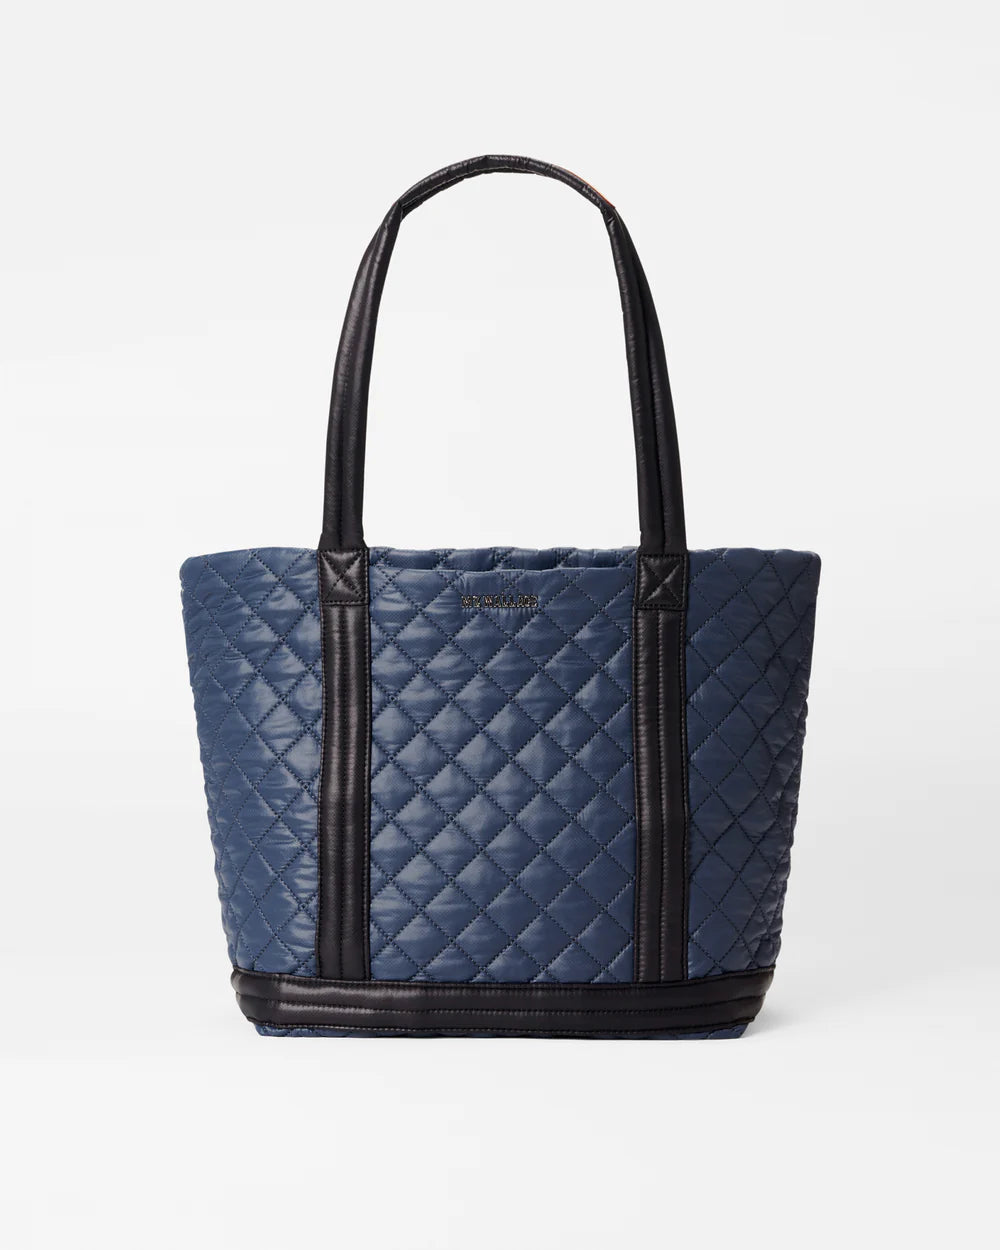 MZ WALLACE MEDIUM EMPIRE TOTE IN NAVY AND BLACK